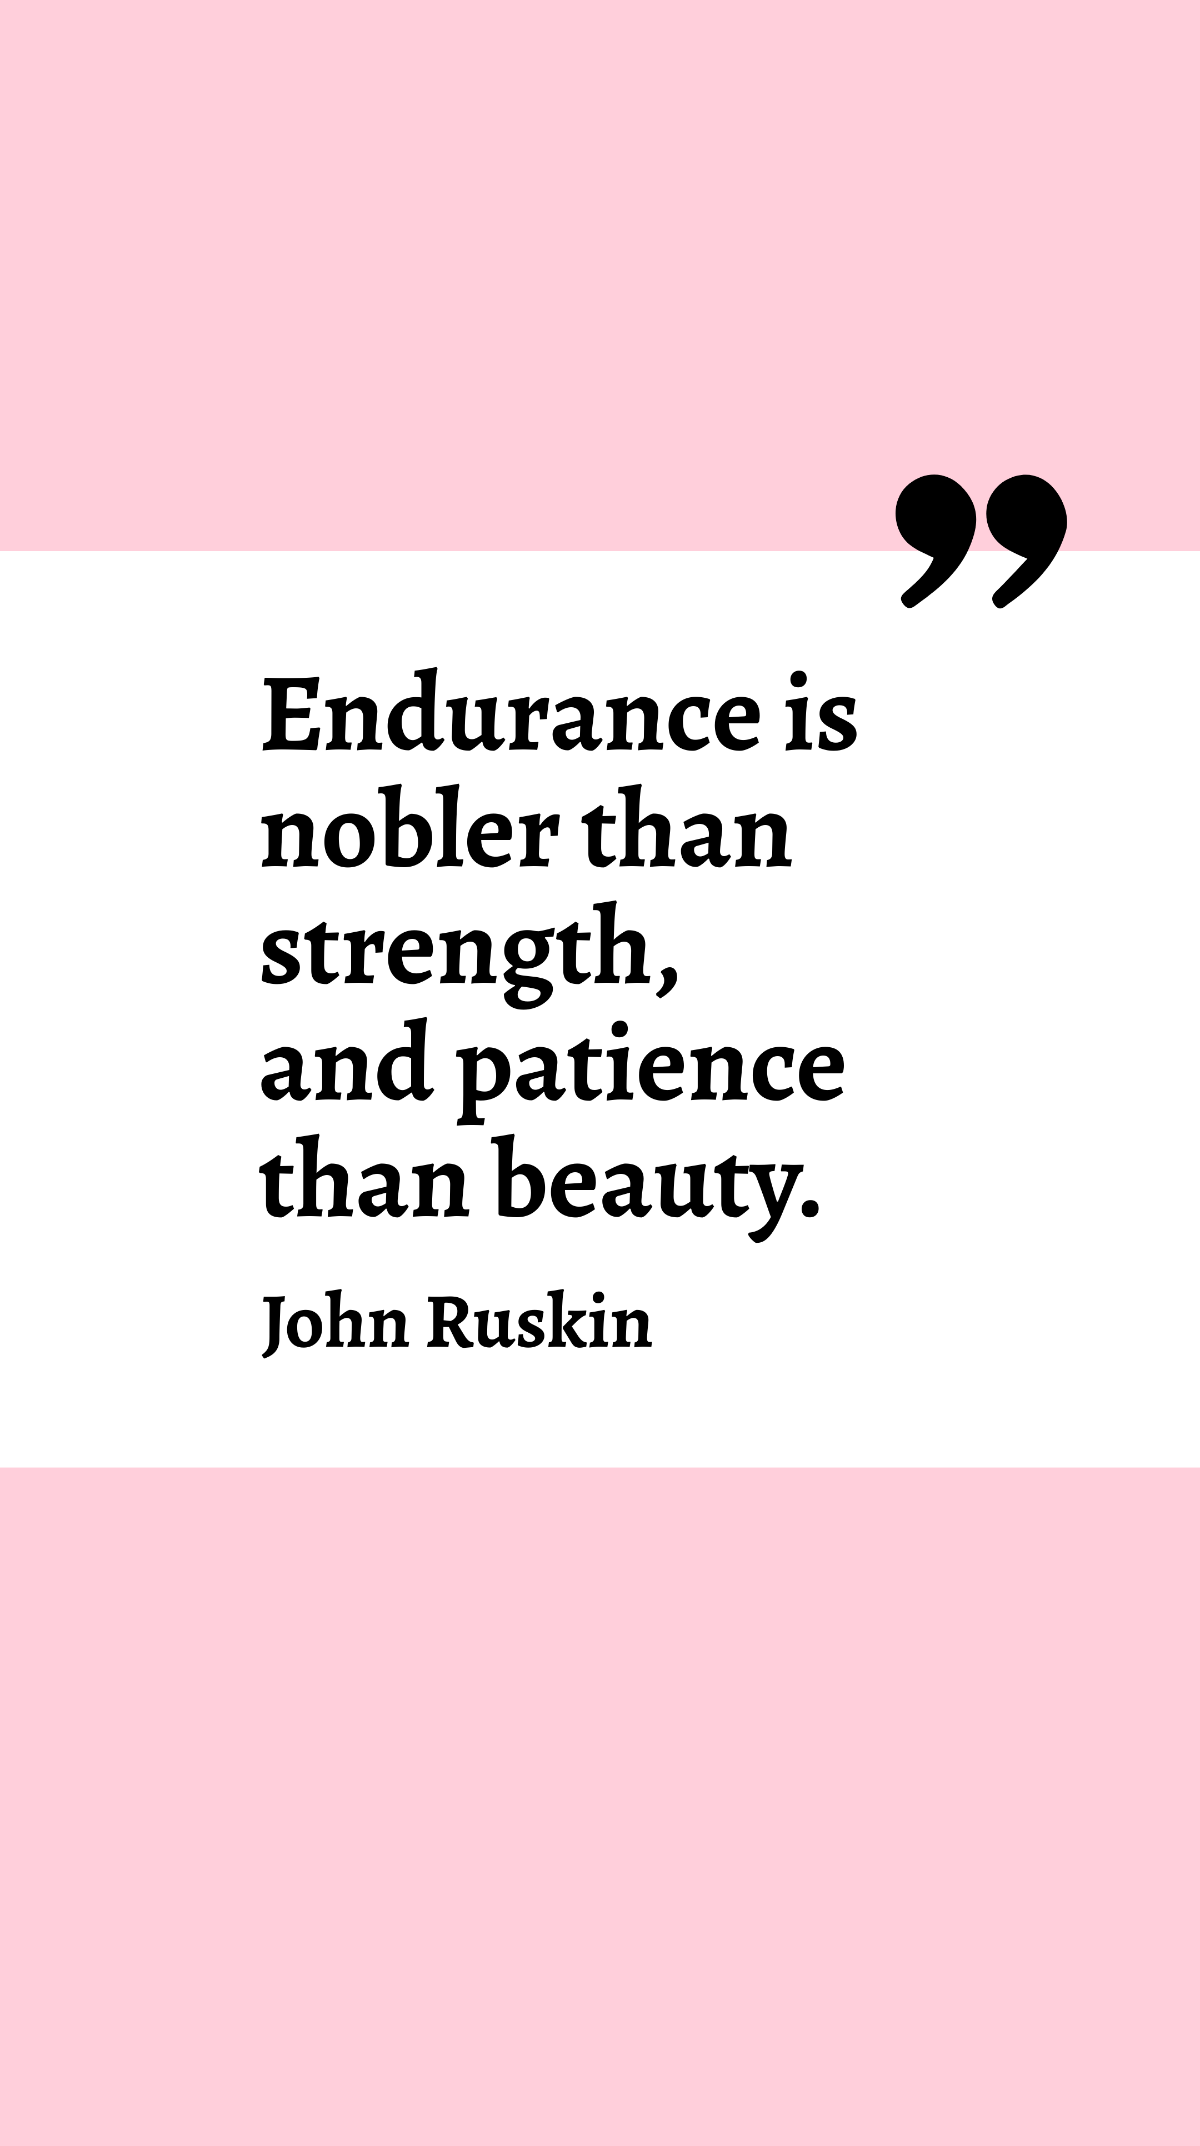 John Ruskin - Endurance is nobler than strength, and patience than beauty. Template